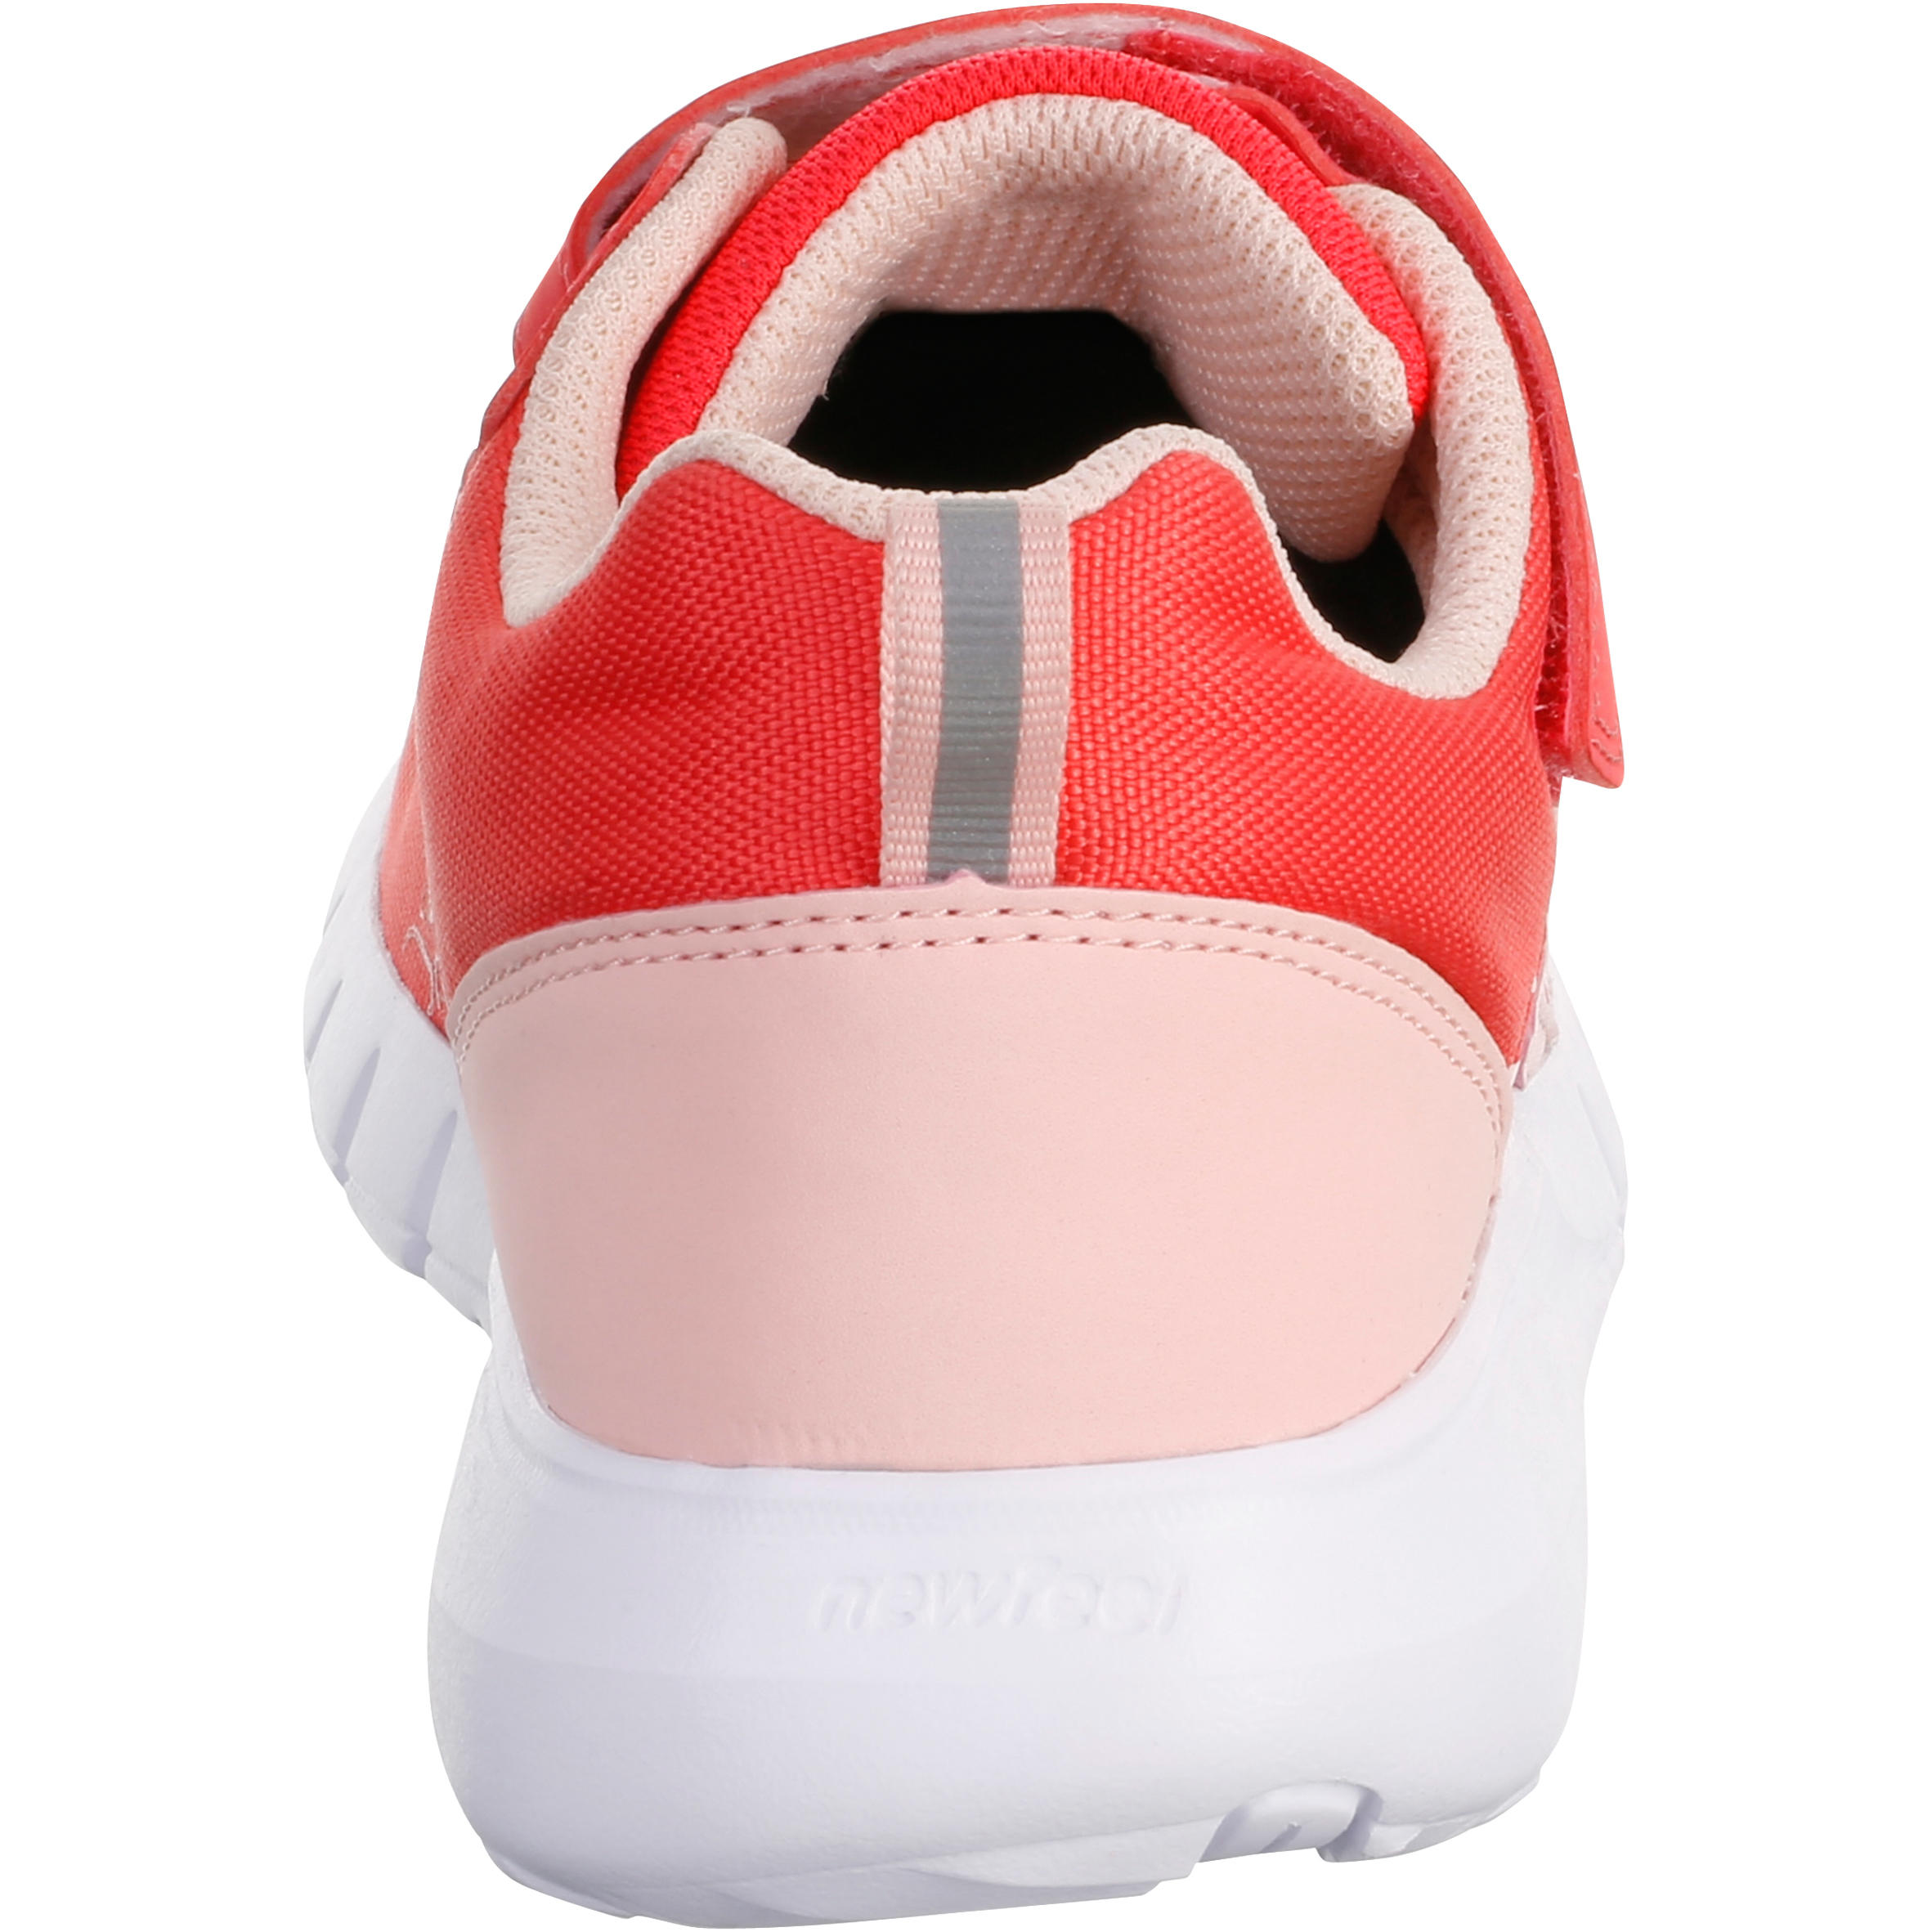 Kids' lightweight and waterproof rip-tab shoes, red 2/9